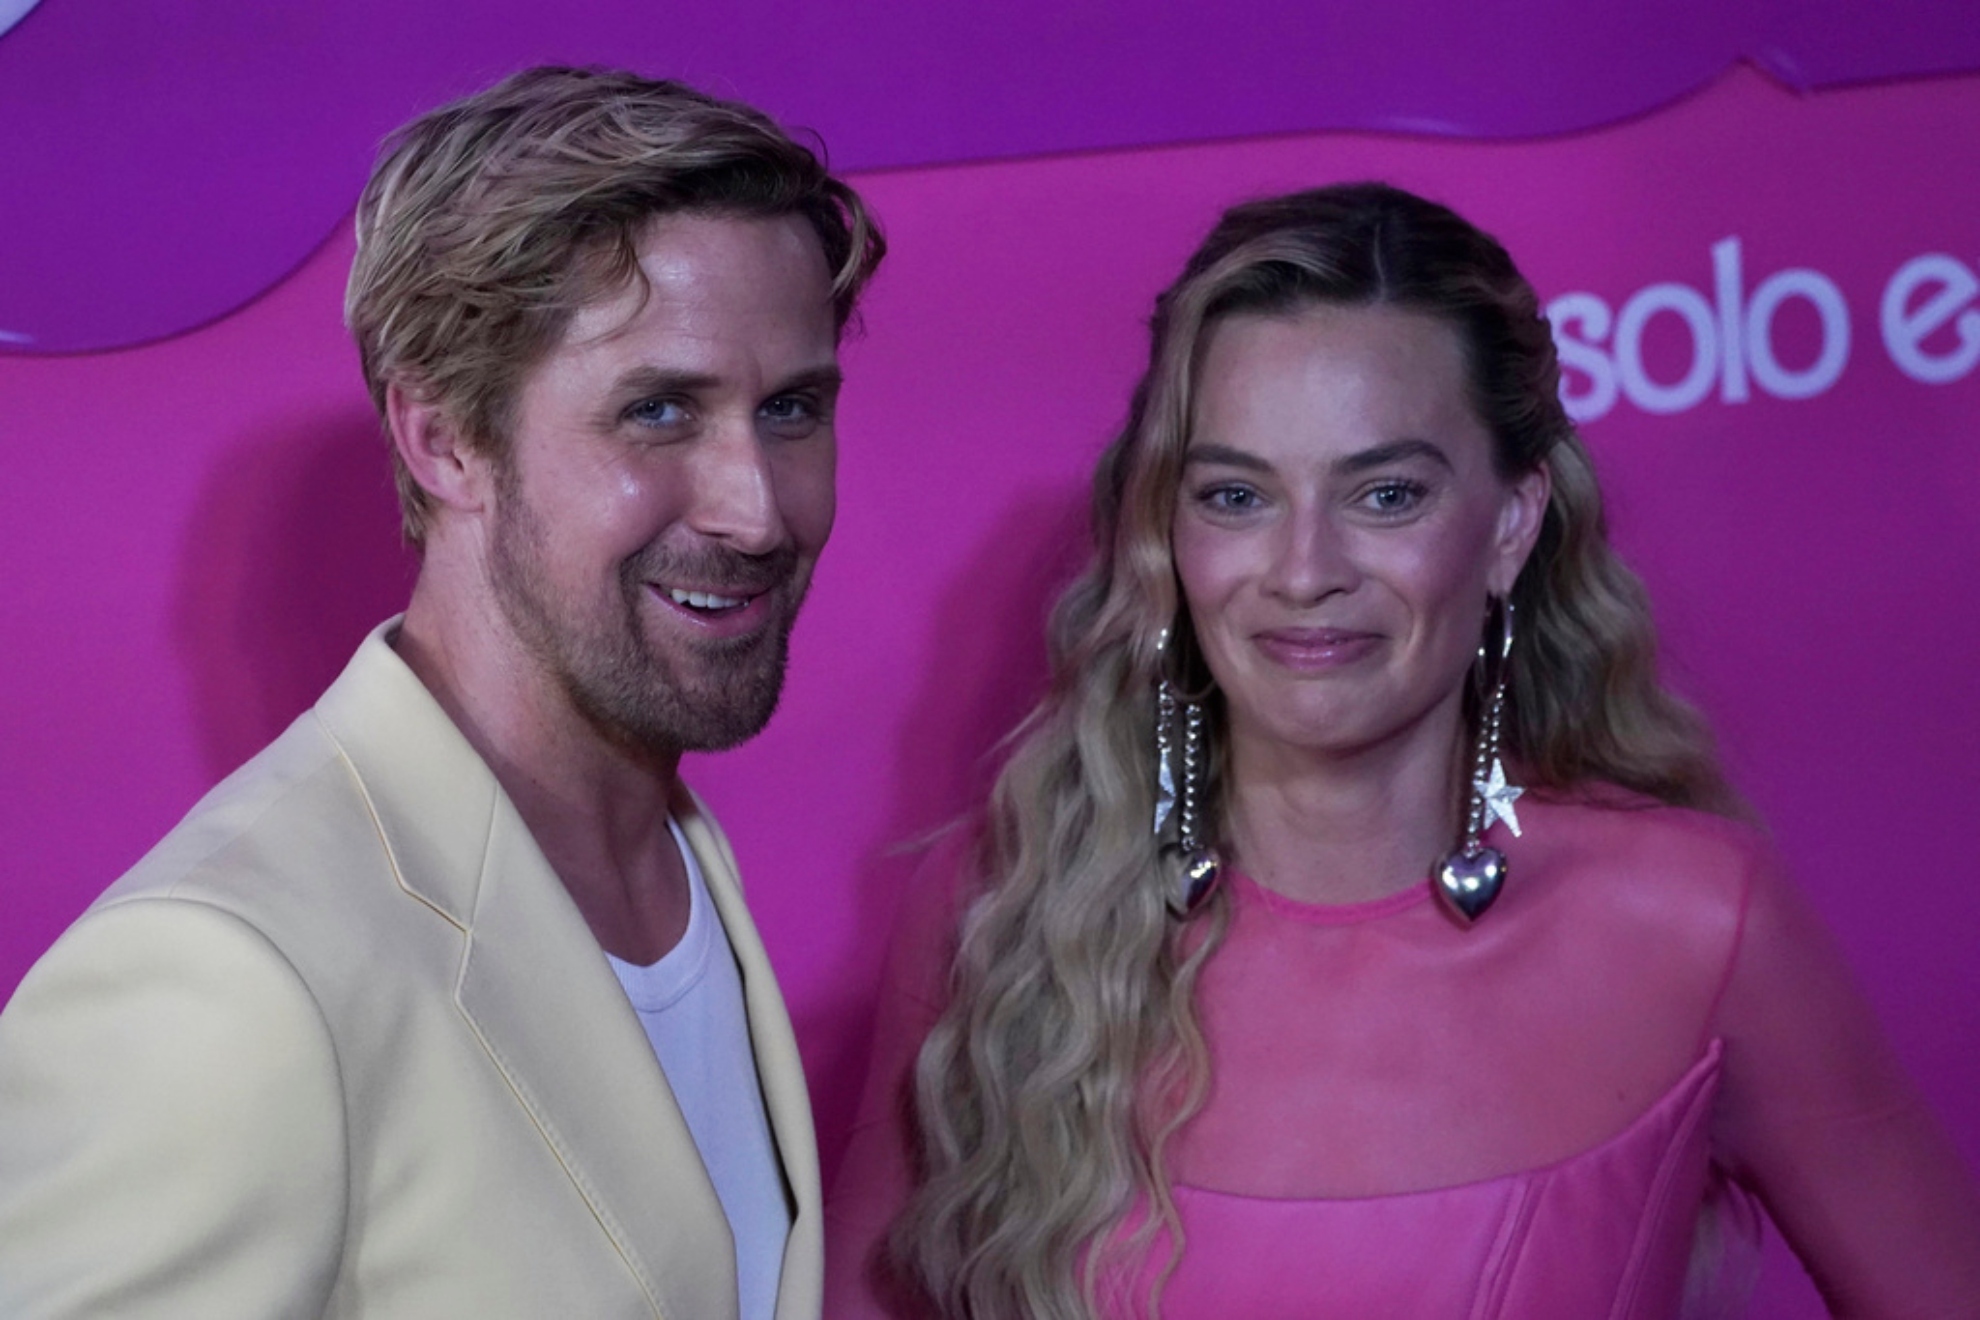 Margot Robbie got heat from her friends for not kissing Ryan Gosling when she had the chance